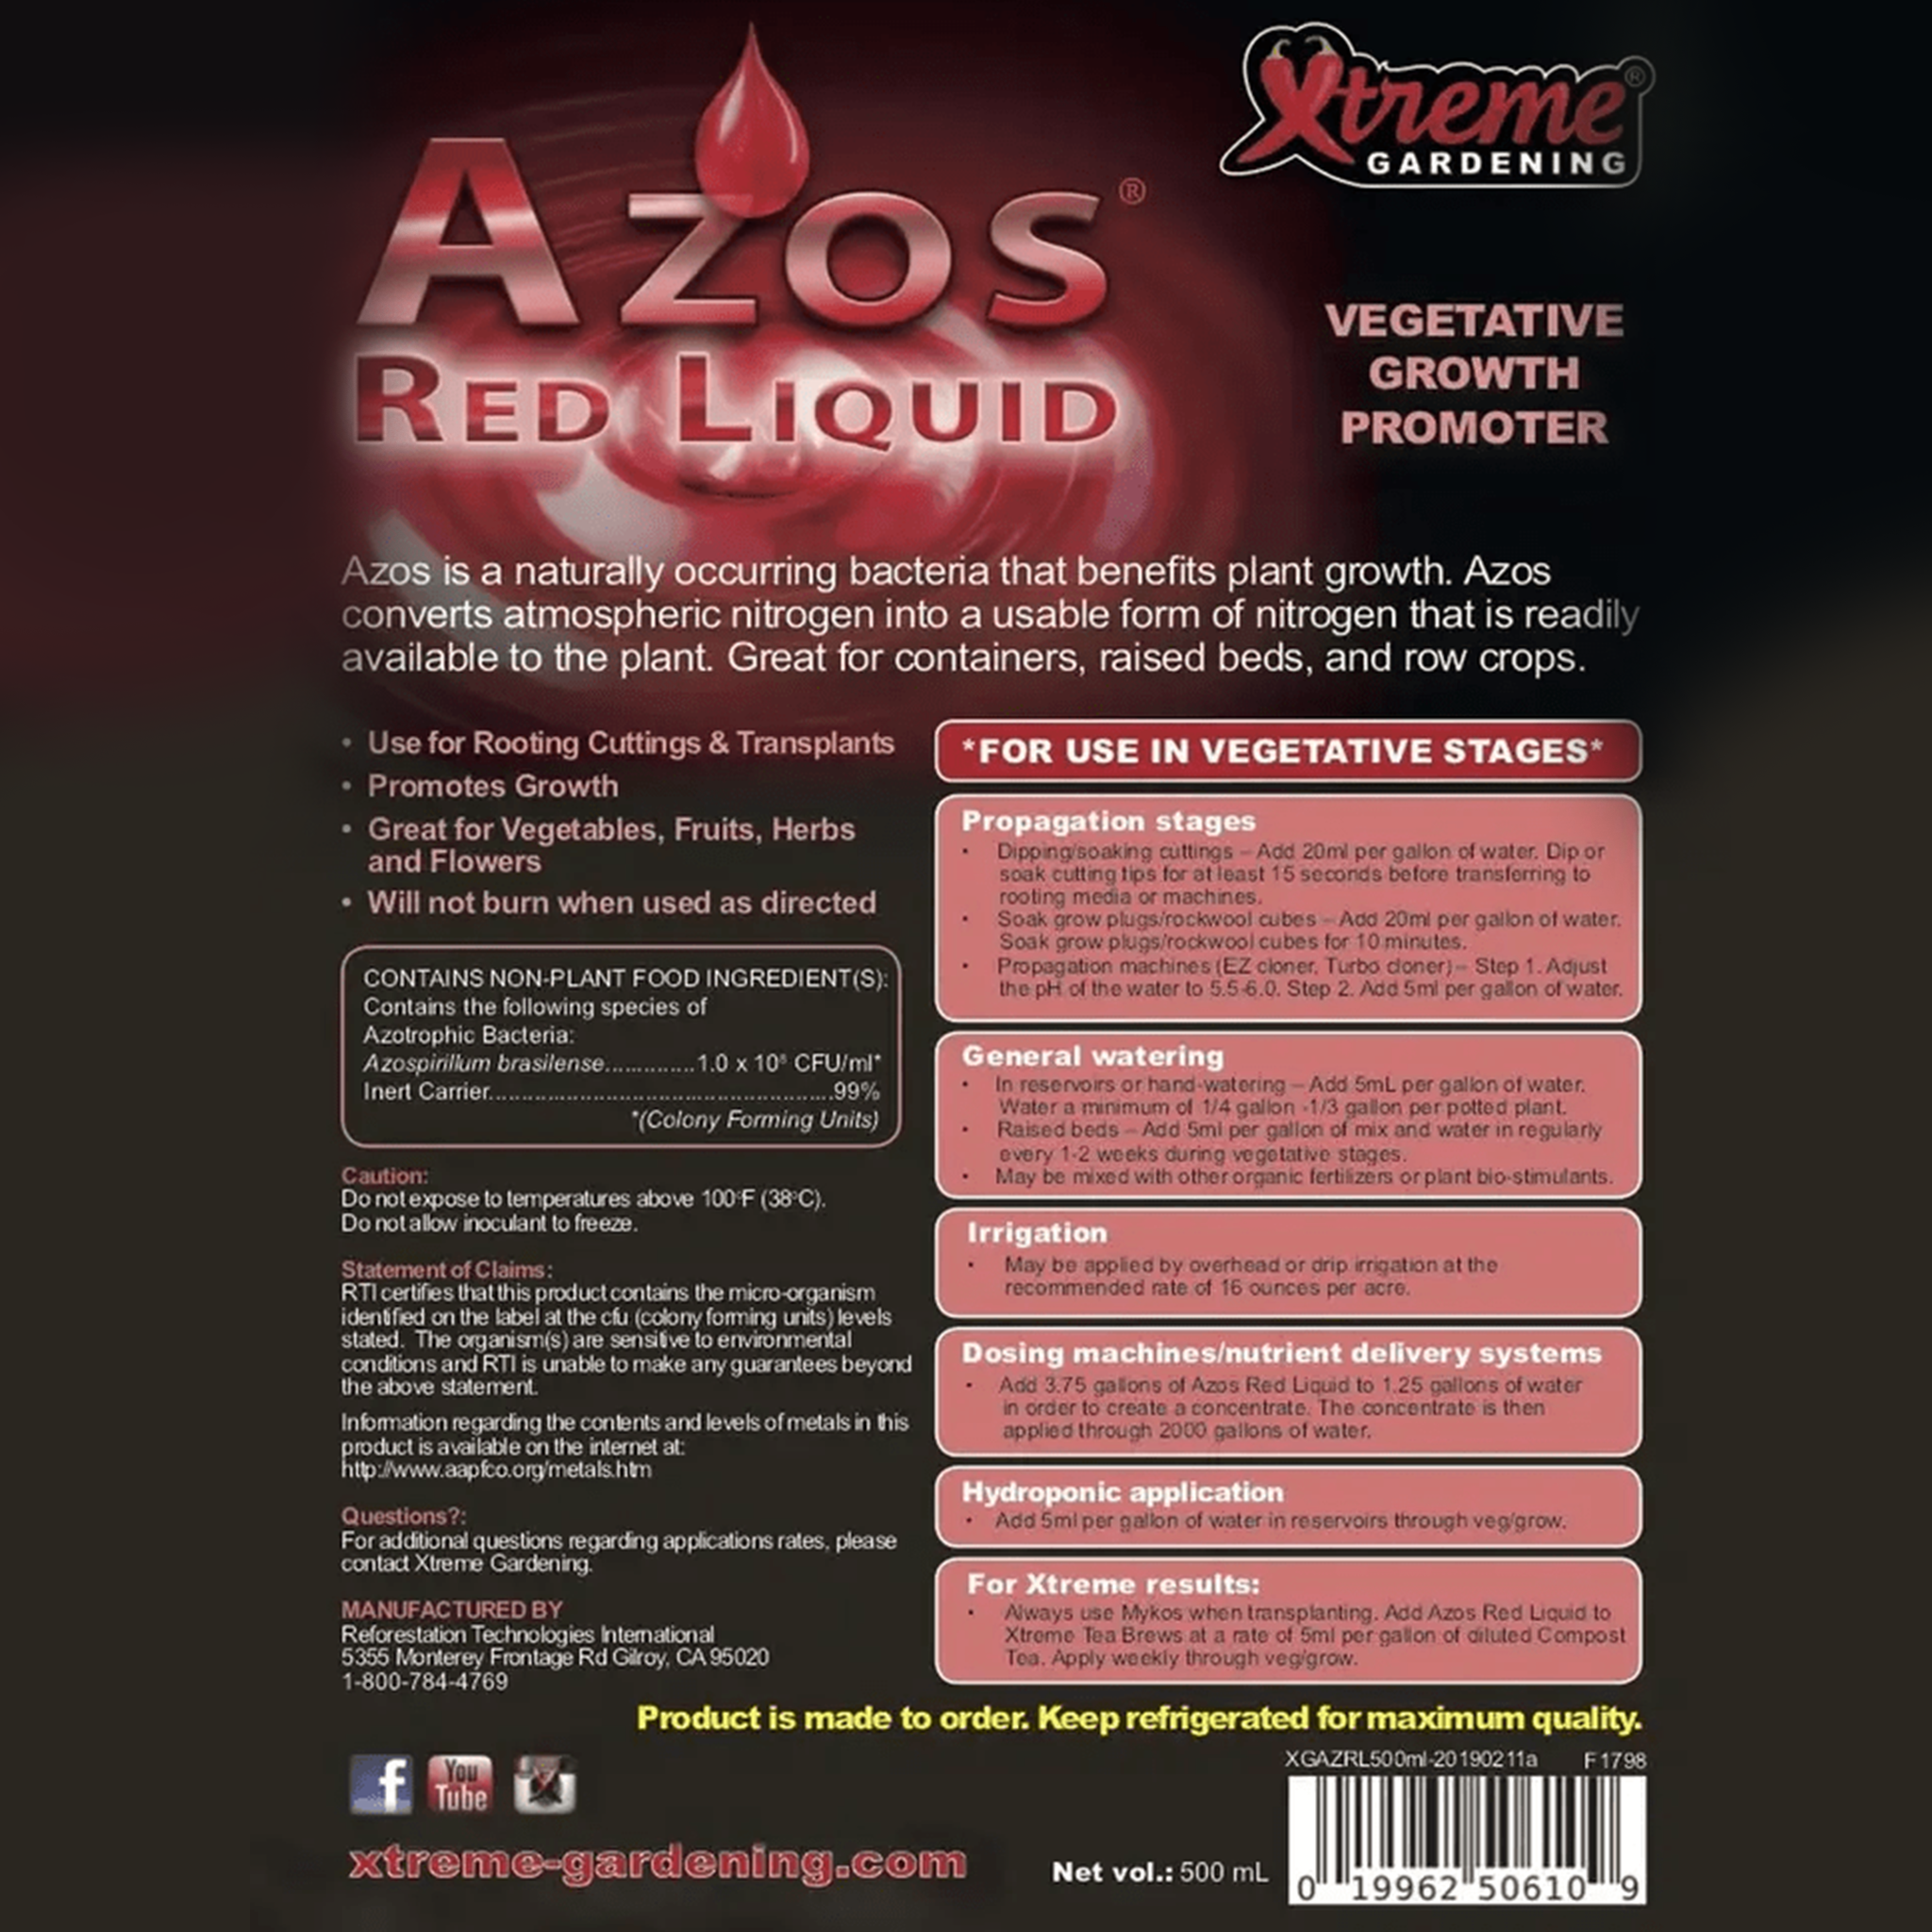 Azos Red Liquid Directions